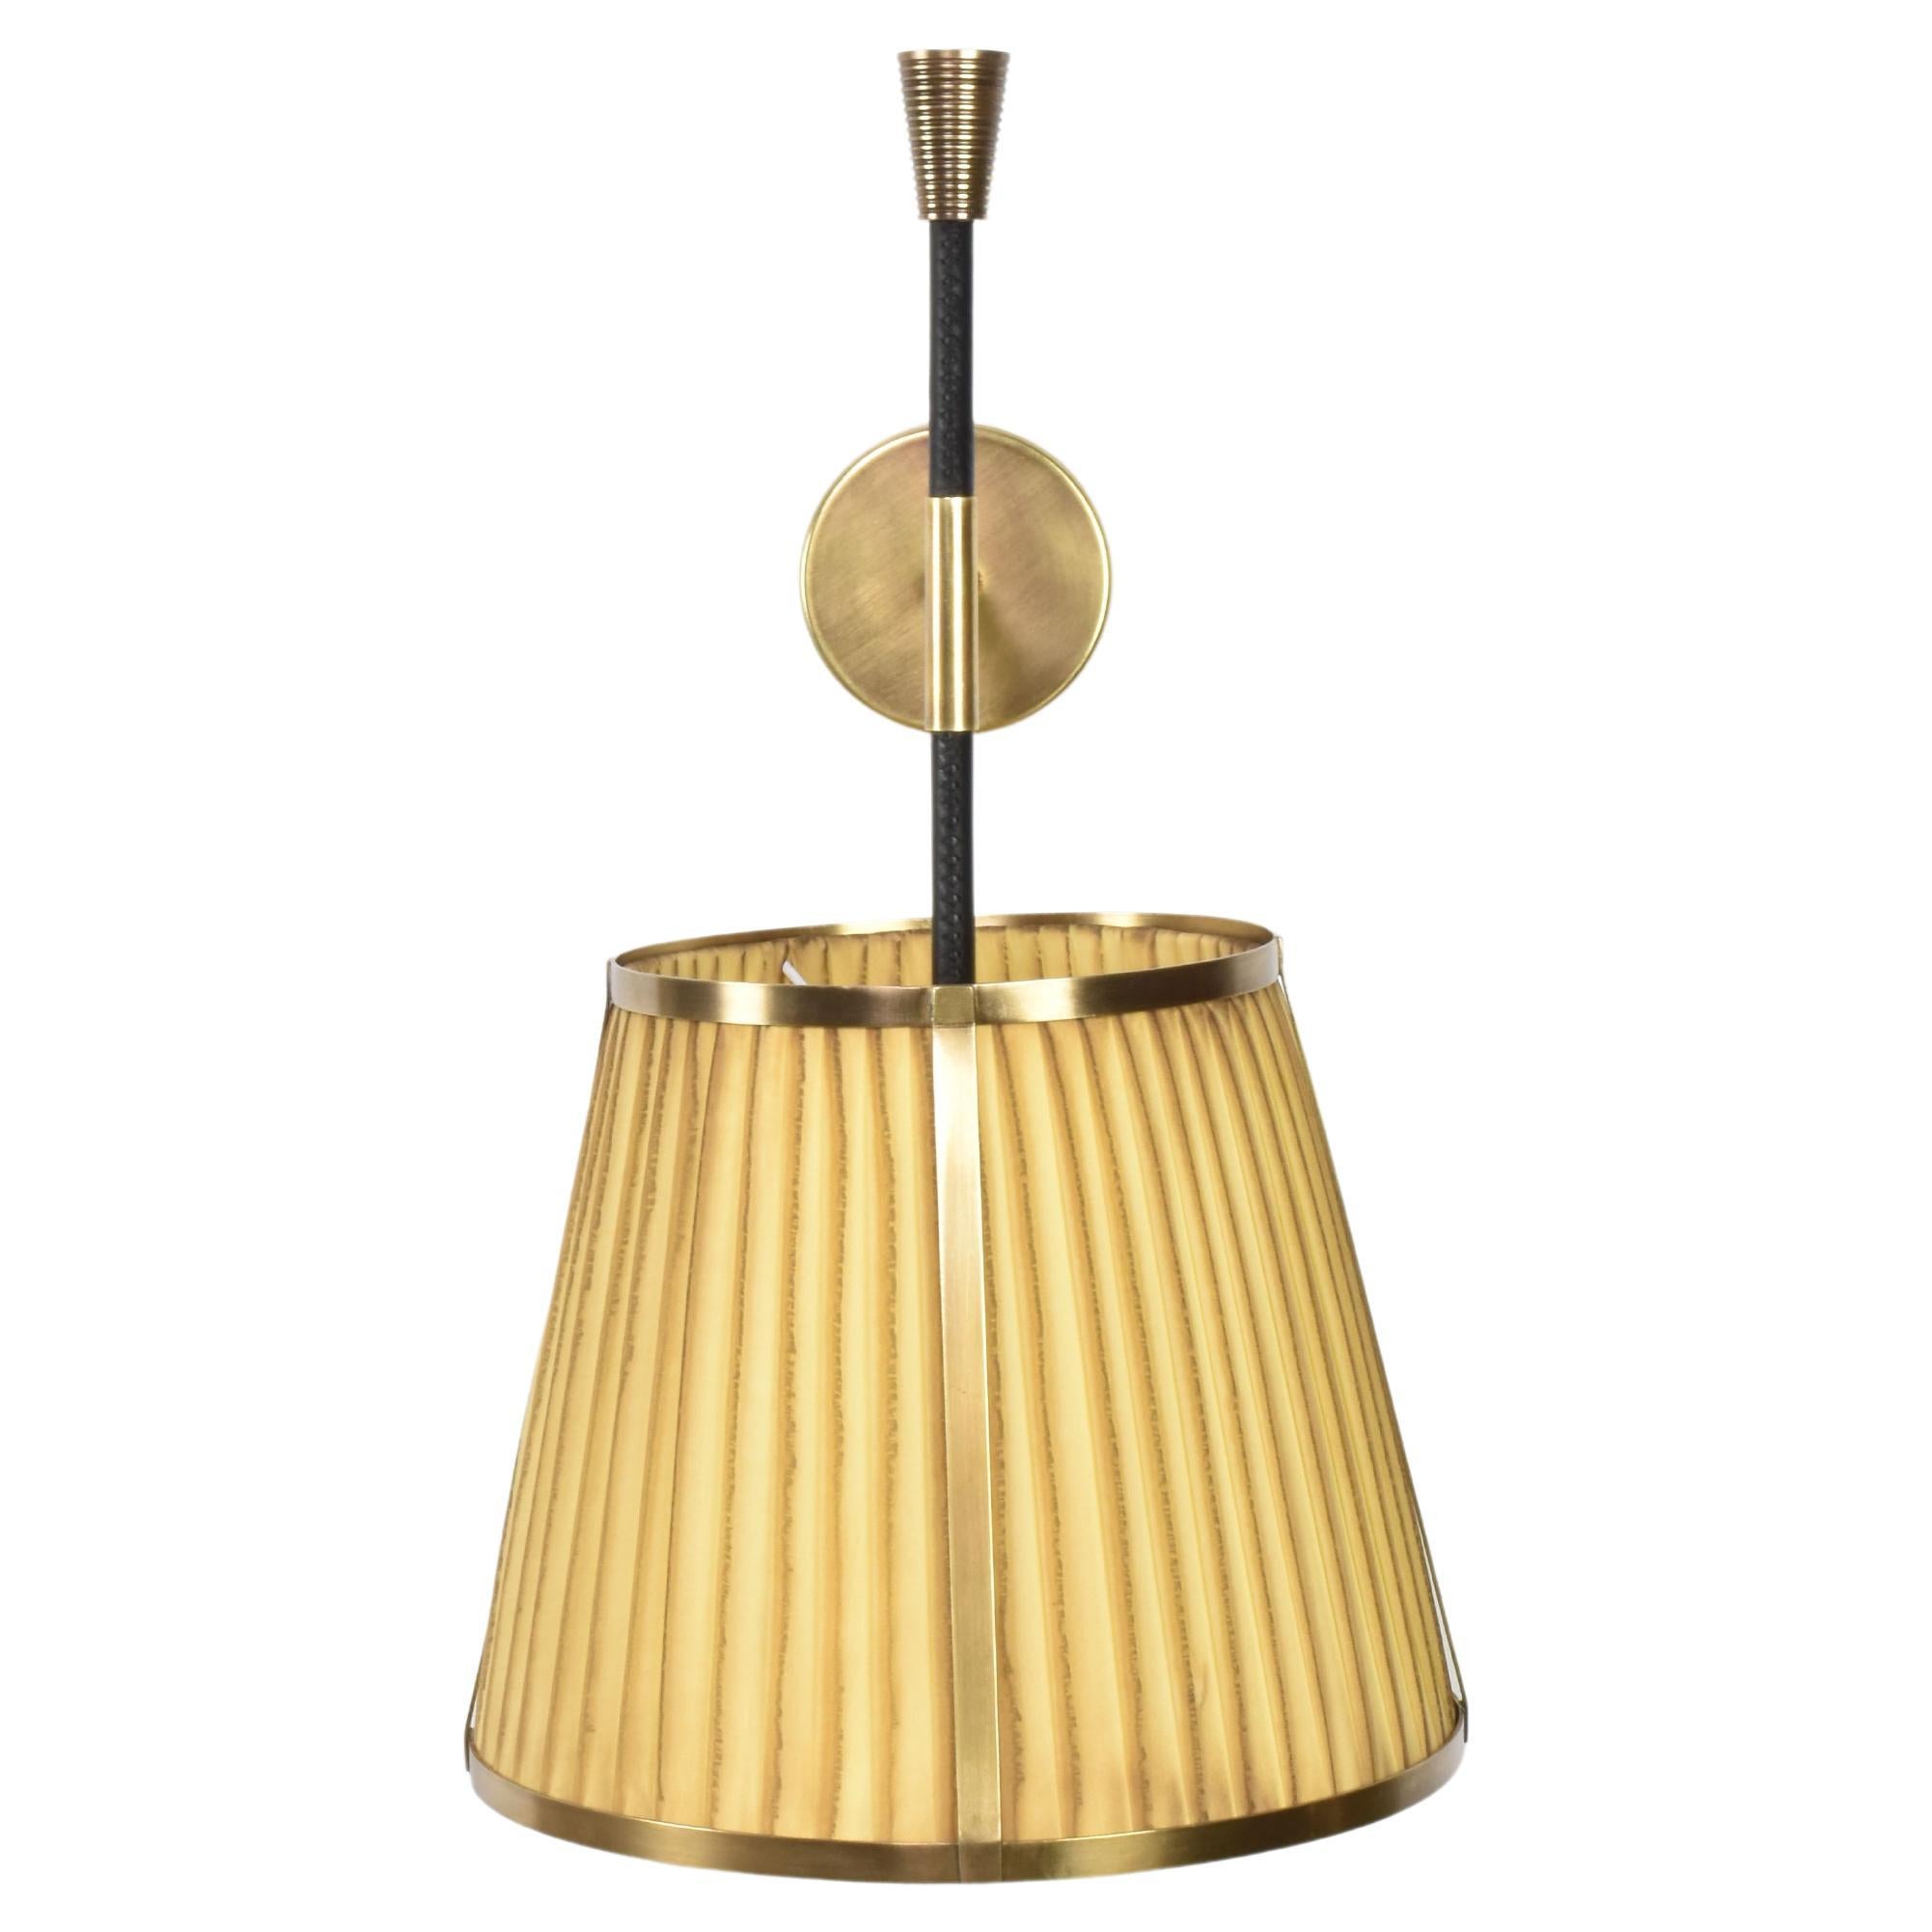 Caeli-W4 Brass and Fabric Sconce, JAS For Sale